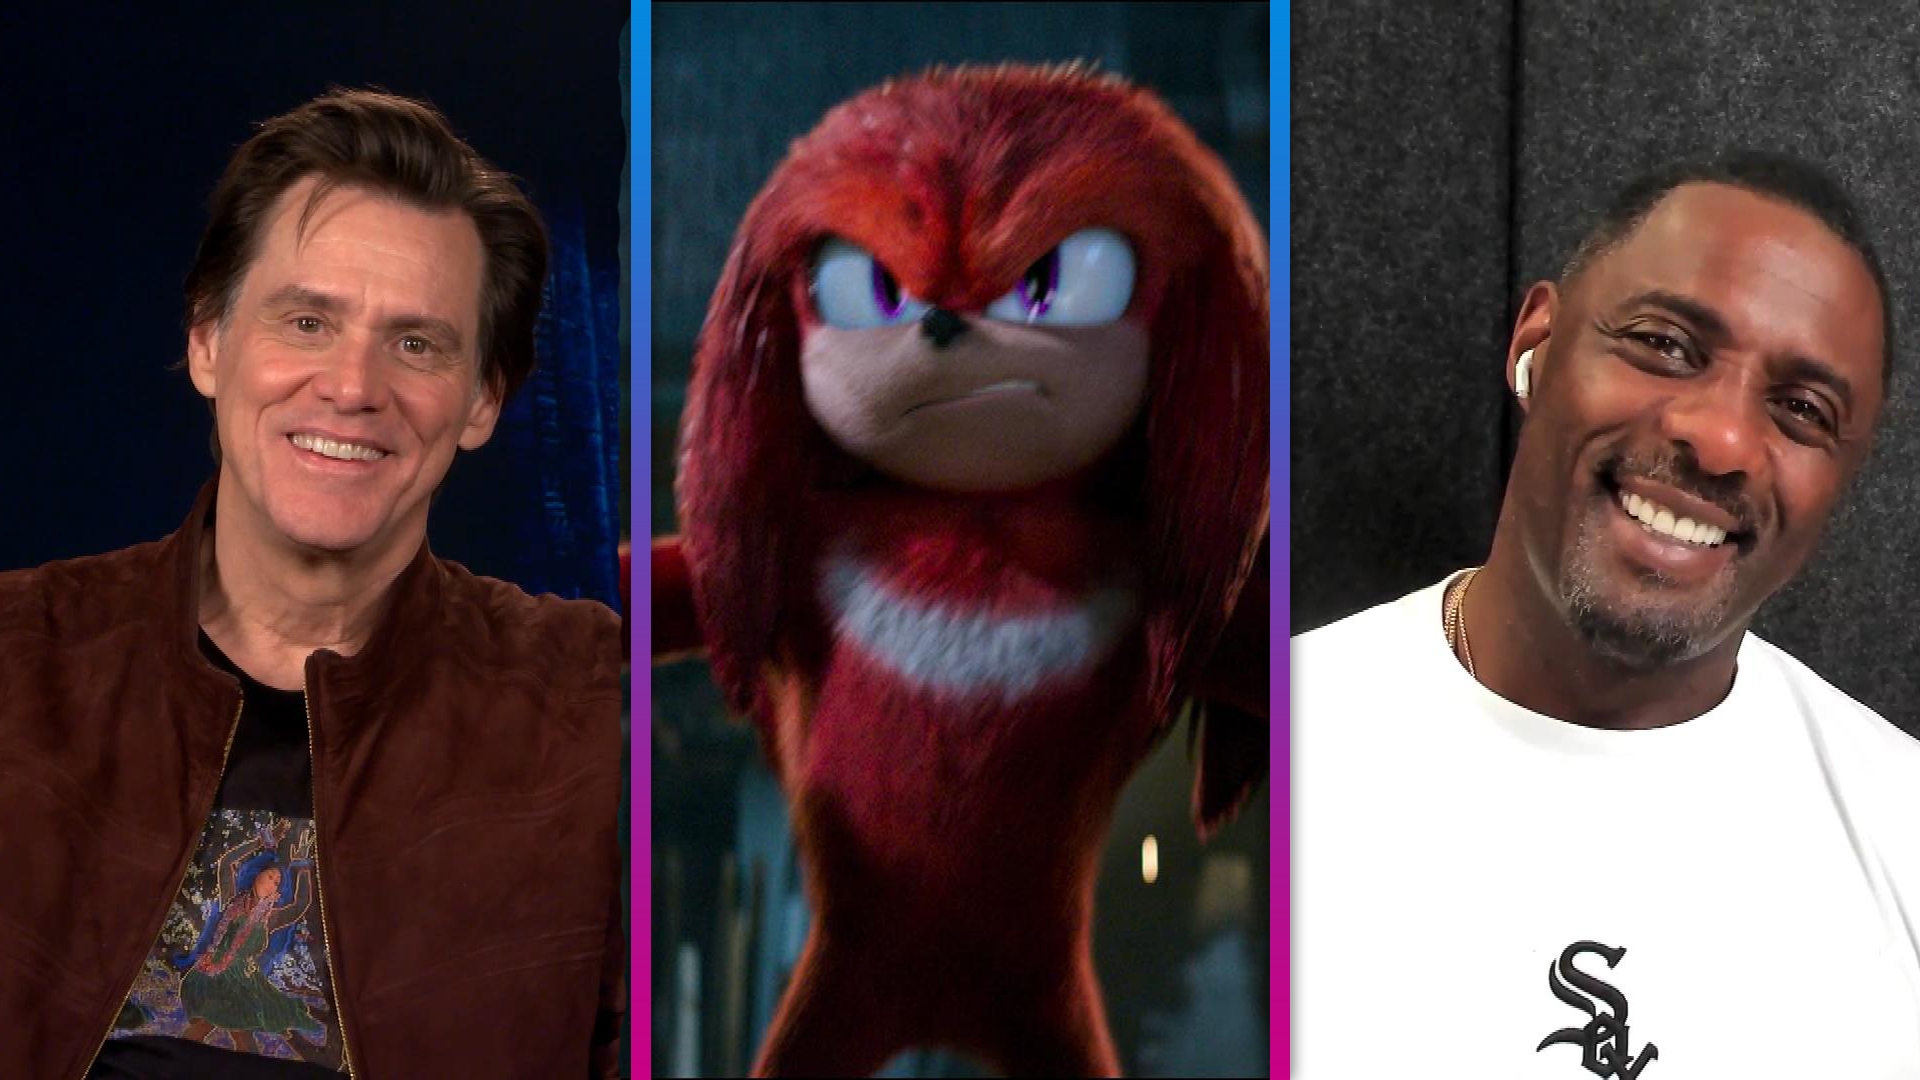 Sonic the Hedgehog Cast REACTS to Character Redesign (Exclusive